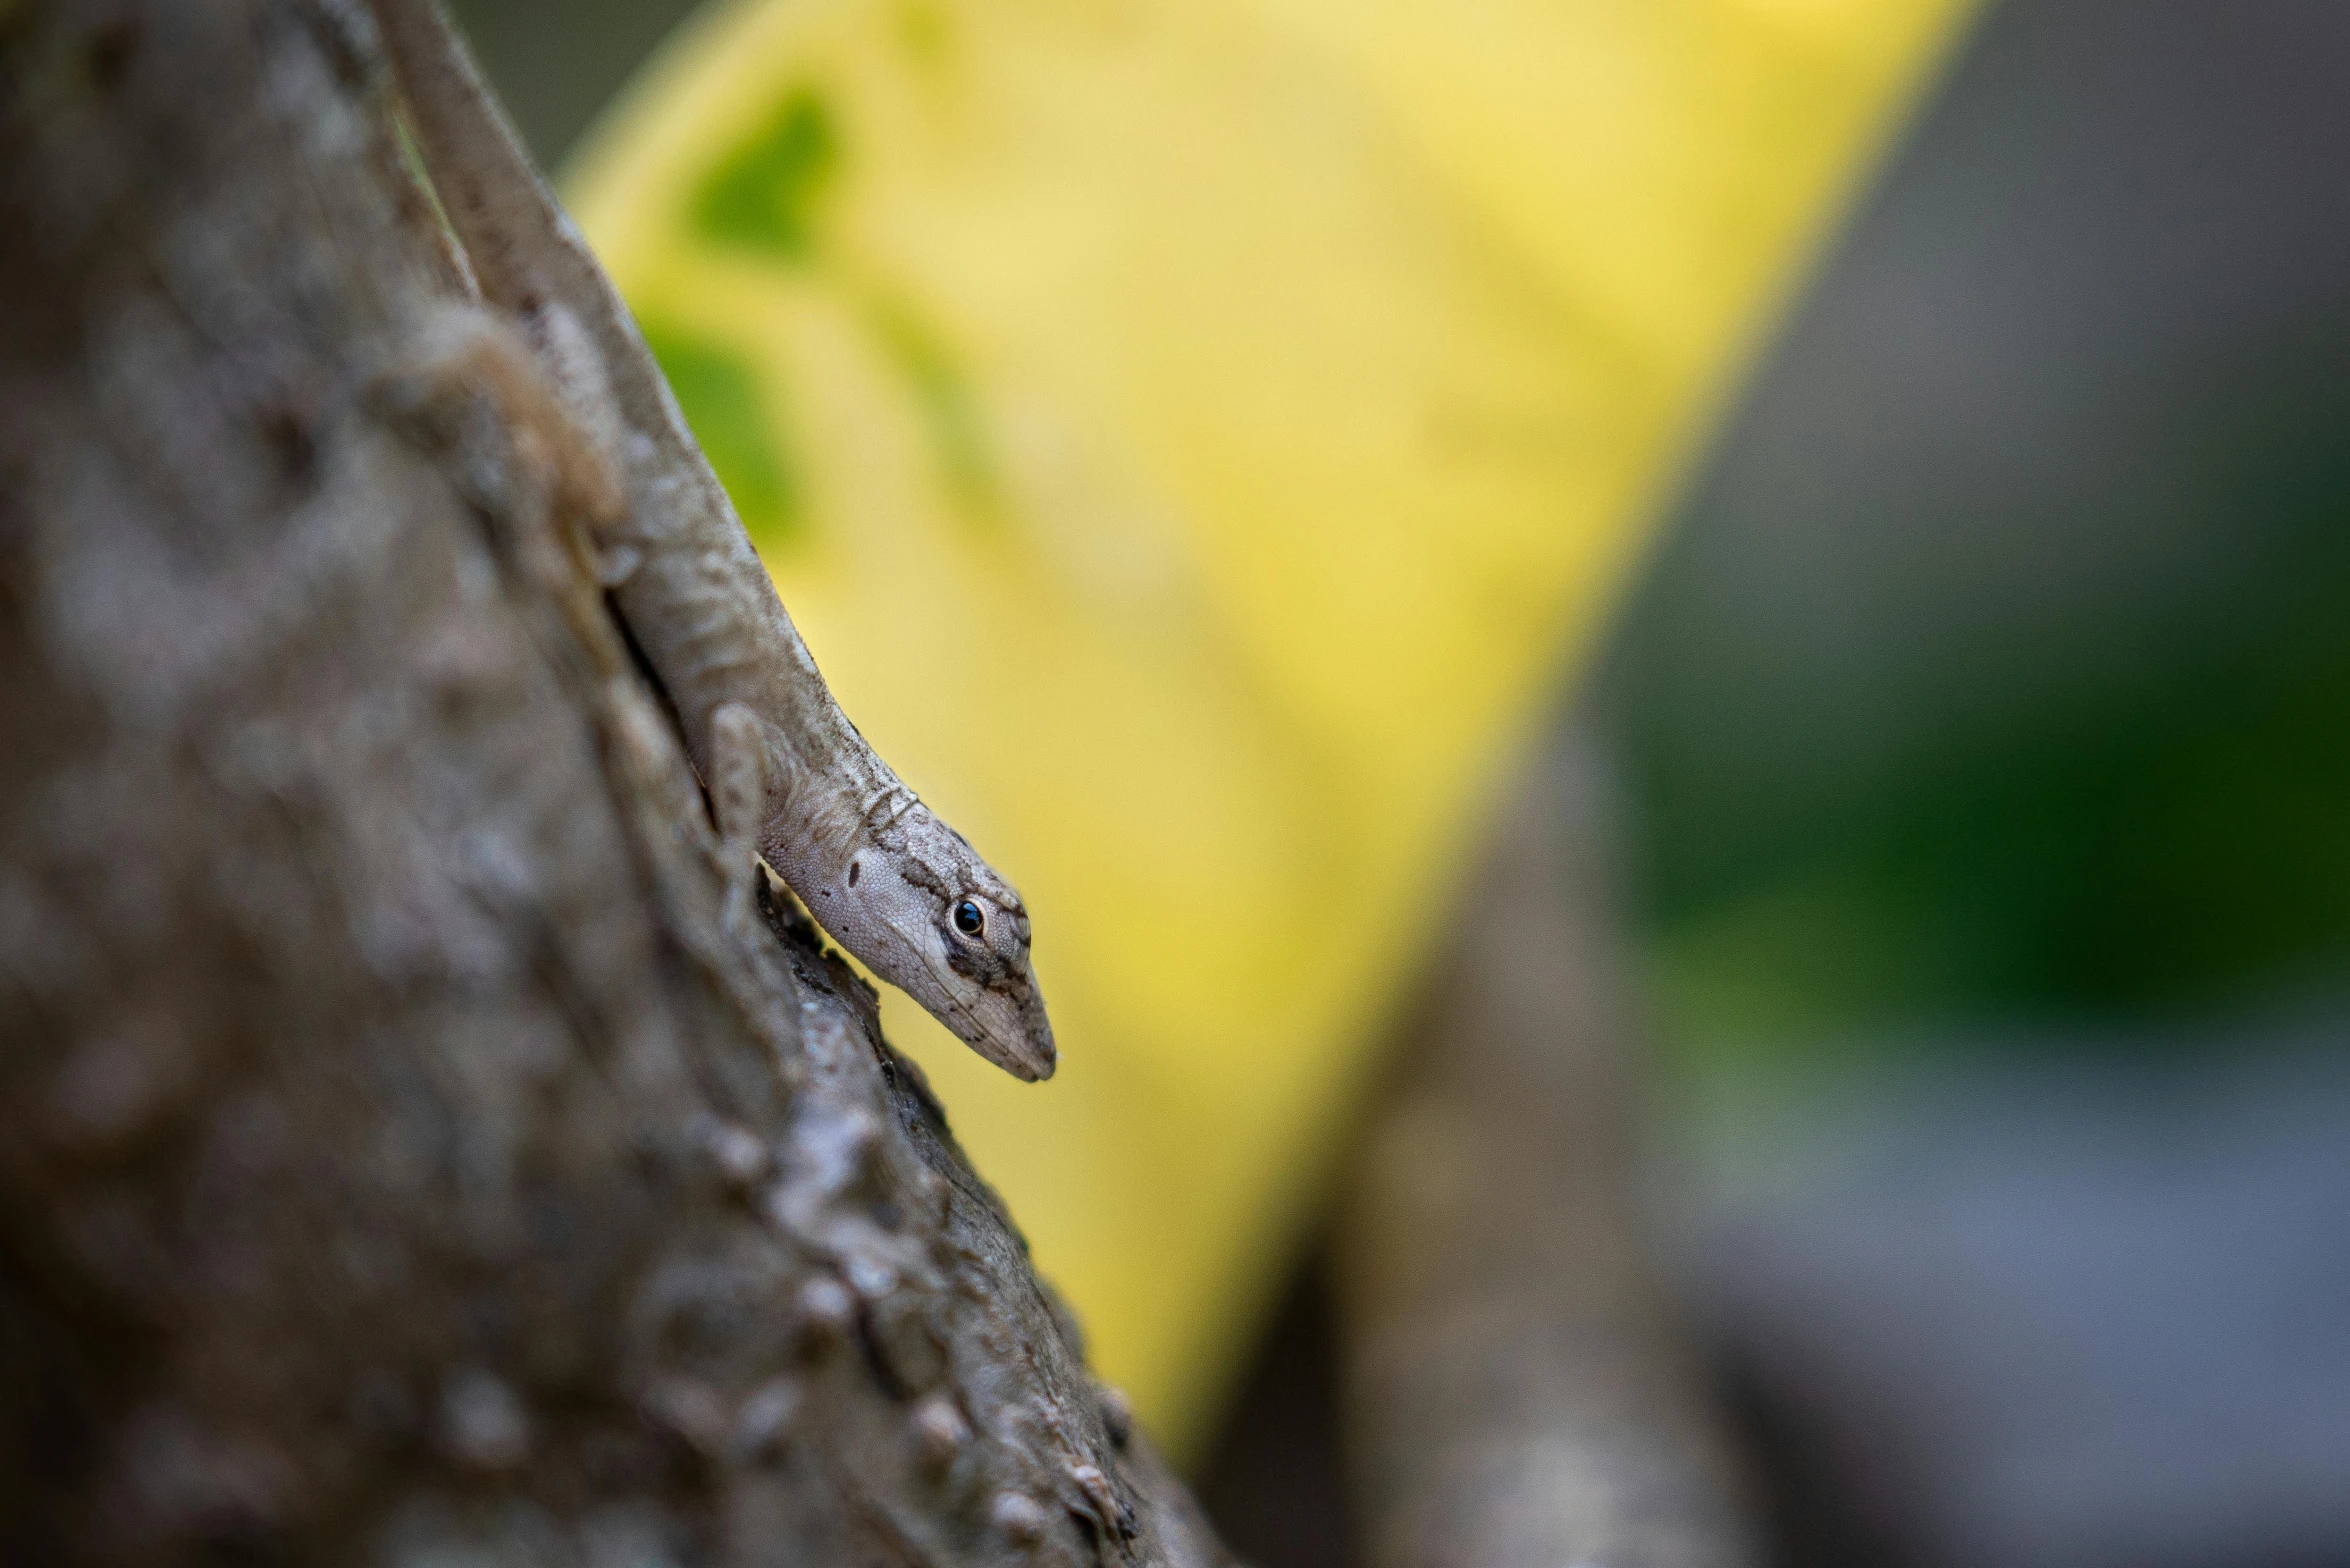 a small snake climbing up the side of a tree